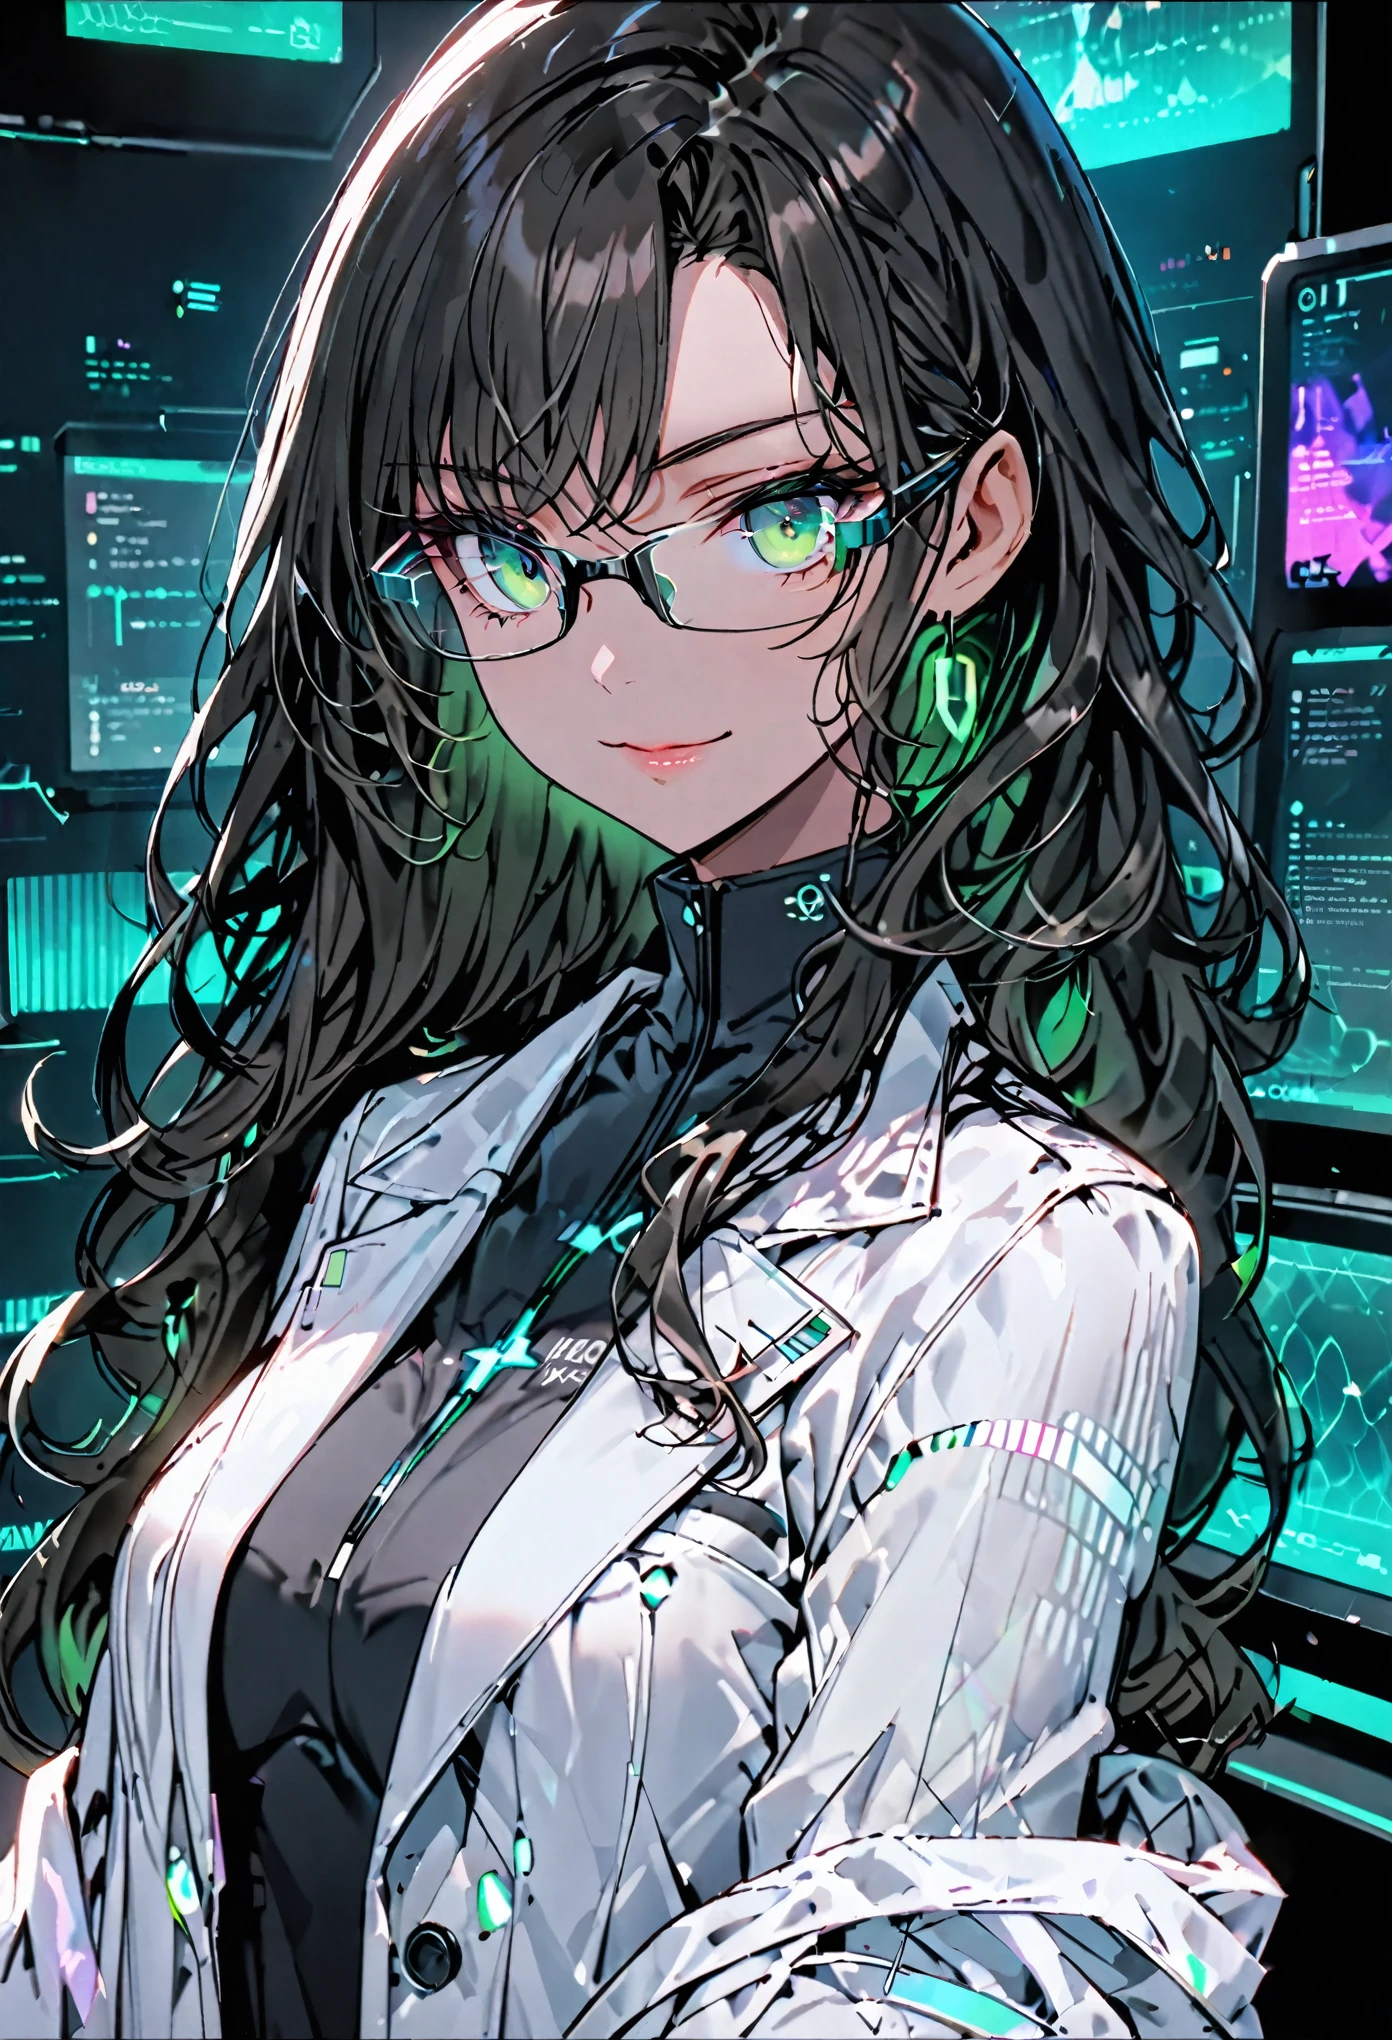 deep oceanic green eyes, holographic displays, dark chestnut hair, long hair, wavy hair:0.4, olive skin, voluptuous figure, tailored suits, exuding confidence and control, solo, female, sfw, medium shot, lab, futuristic, gentle smile, low light, warm, black glasses, thin rimmed glasses, white lab coat, cleavage:0.1